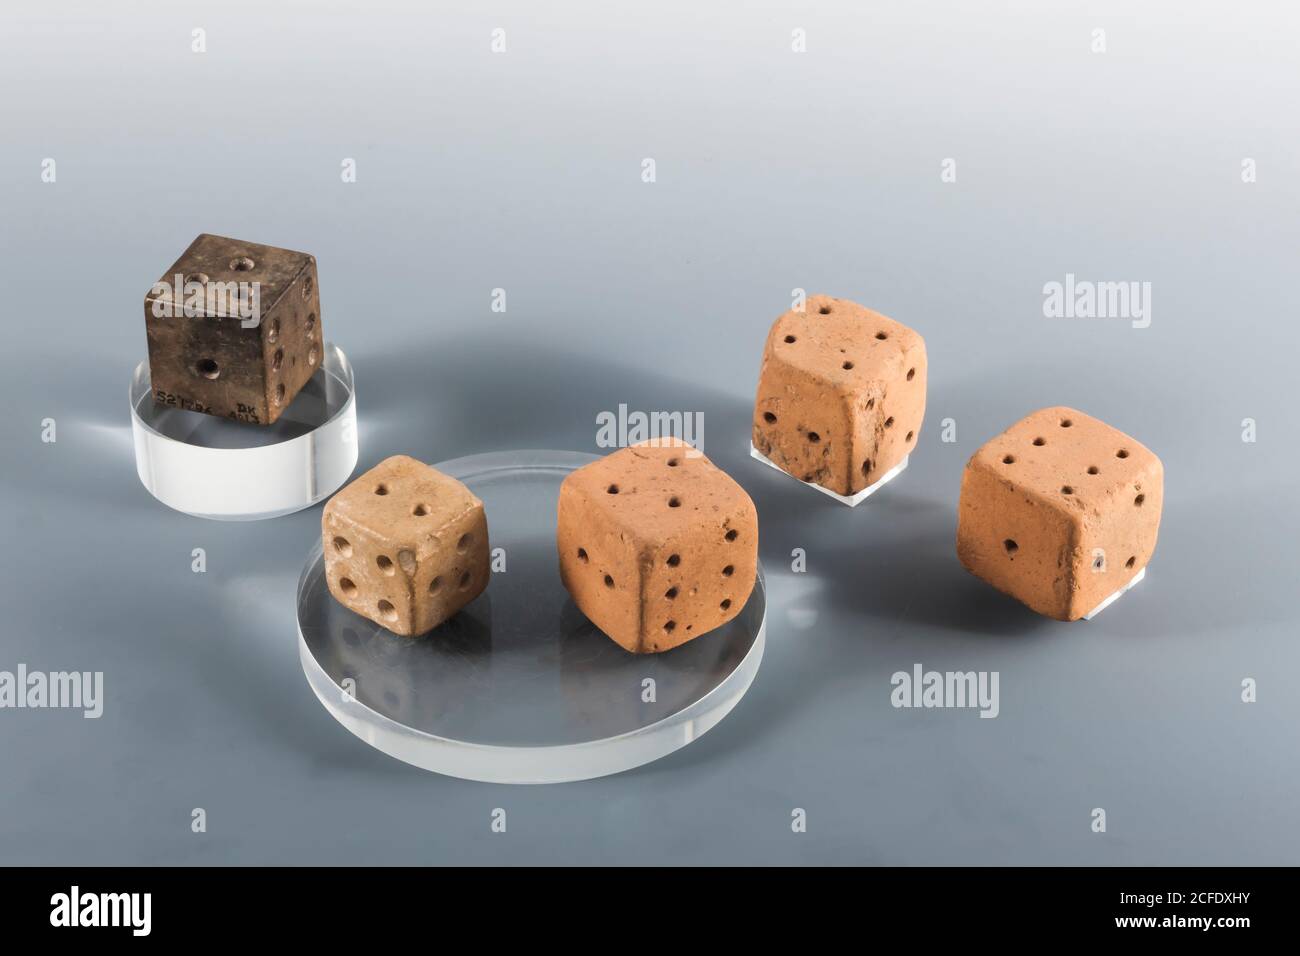 Oldest Clay and stone dice, Mohenjo daro, Indus valley civilization Gallery, National Museum of Pakistan, Karachi, Sindh, Pakistan, South Asia, Asia Stock Photo